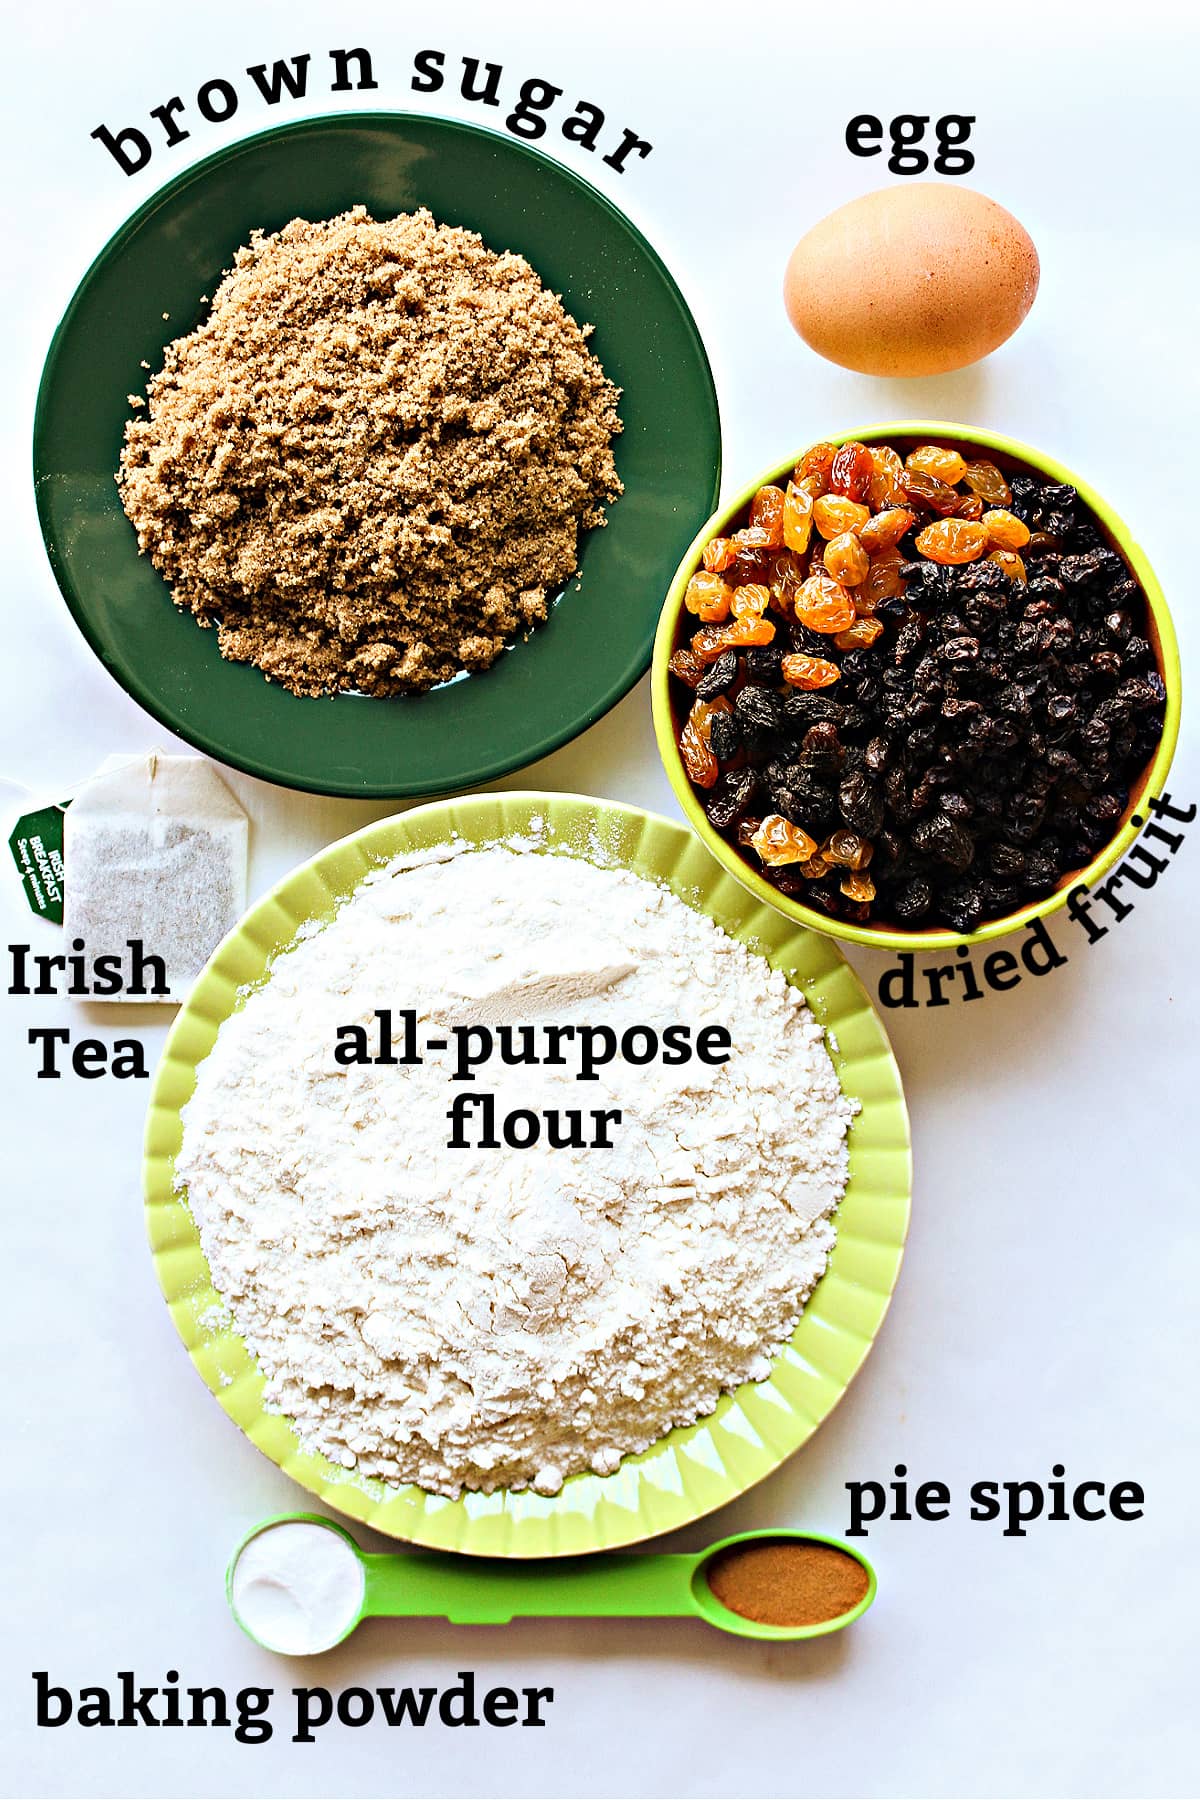 Recipe ingredients with text labels: brown sugar, dried fruit, flour , egg,  tea, baking powder, spice.